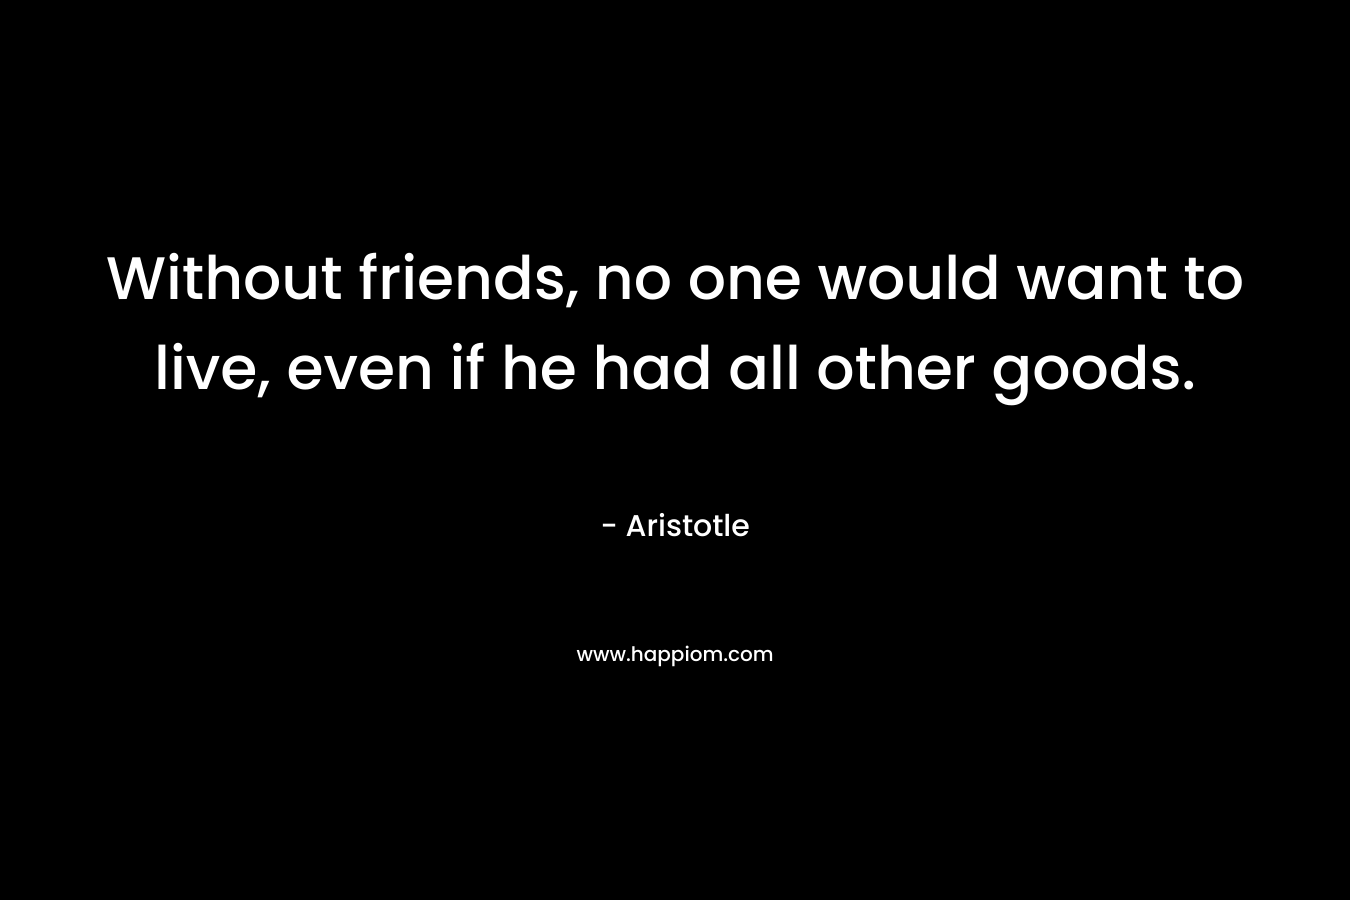 Without friends, no one would want to live, even if he had all other goods.